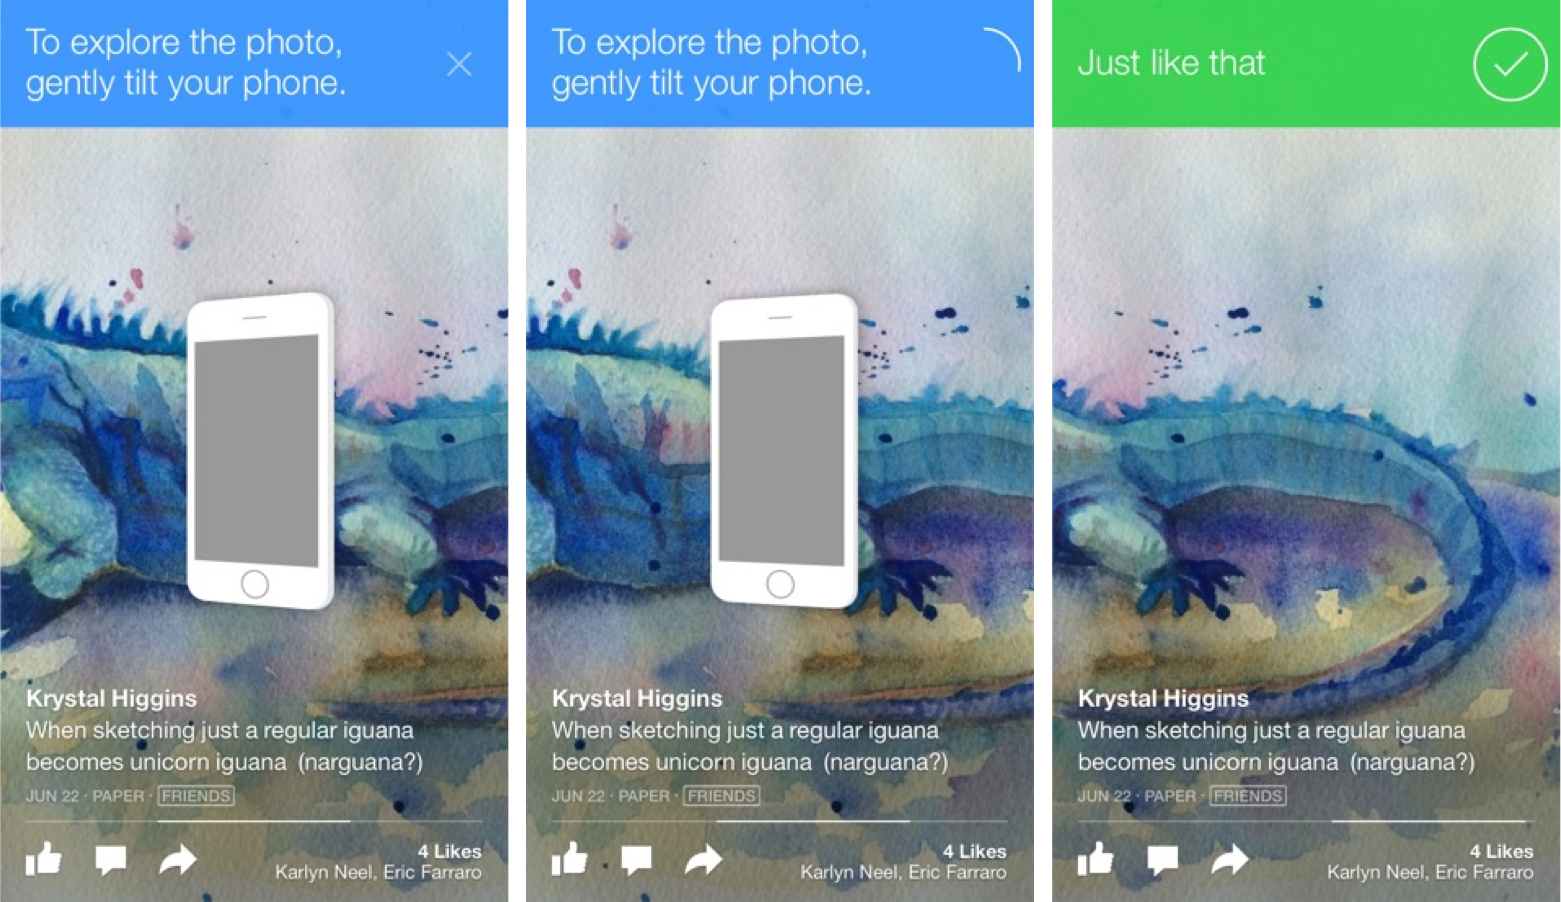 Screenshots of how the old Facebook Paper app guided someone through tilting their phone to pan an image, with an instructional banner at the top, the real world image in the background, and a phone animation that matched the user's phone tilt showing feedback.